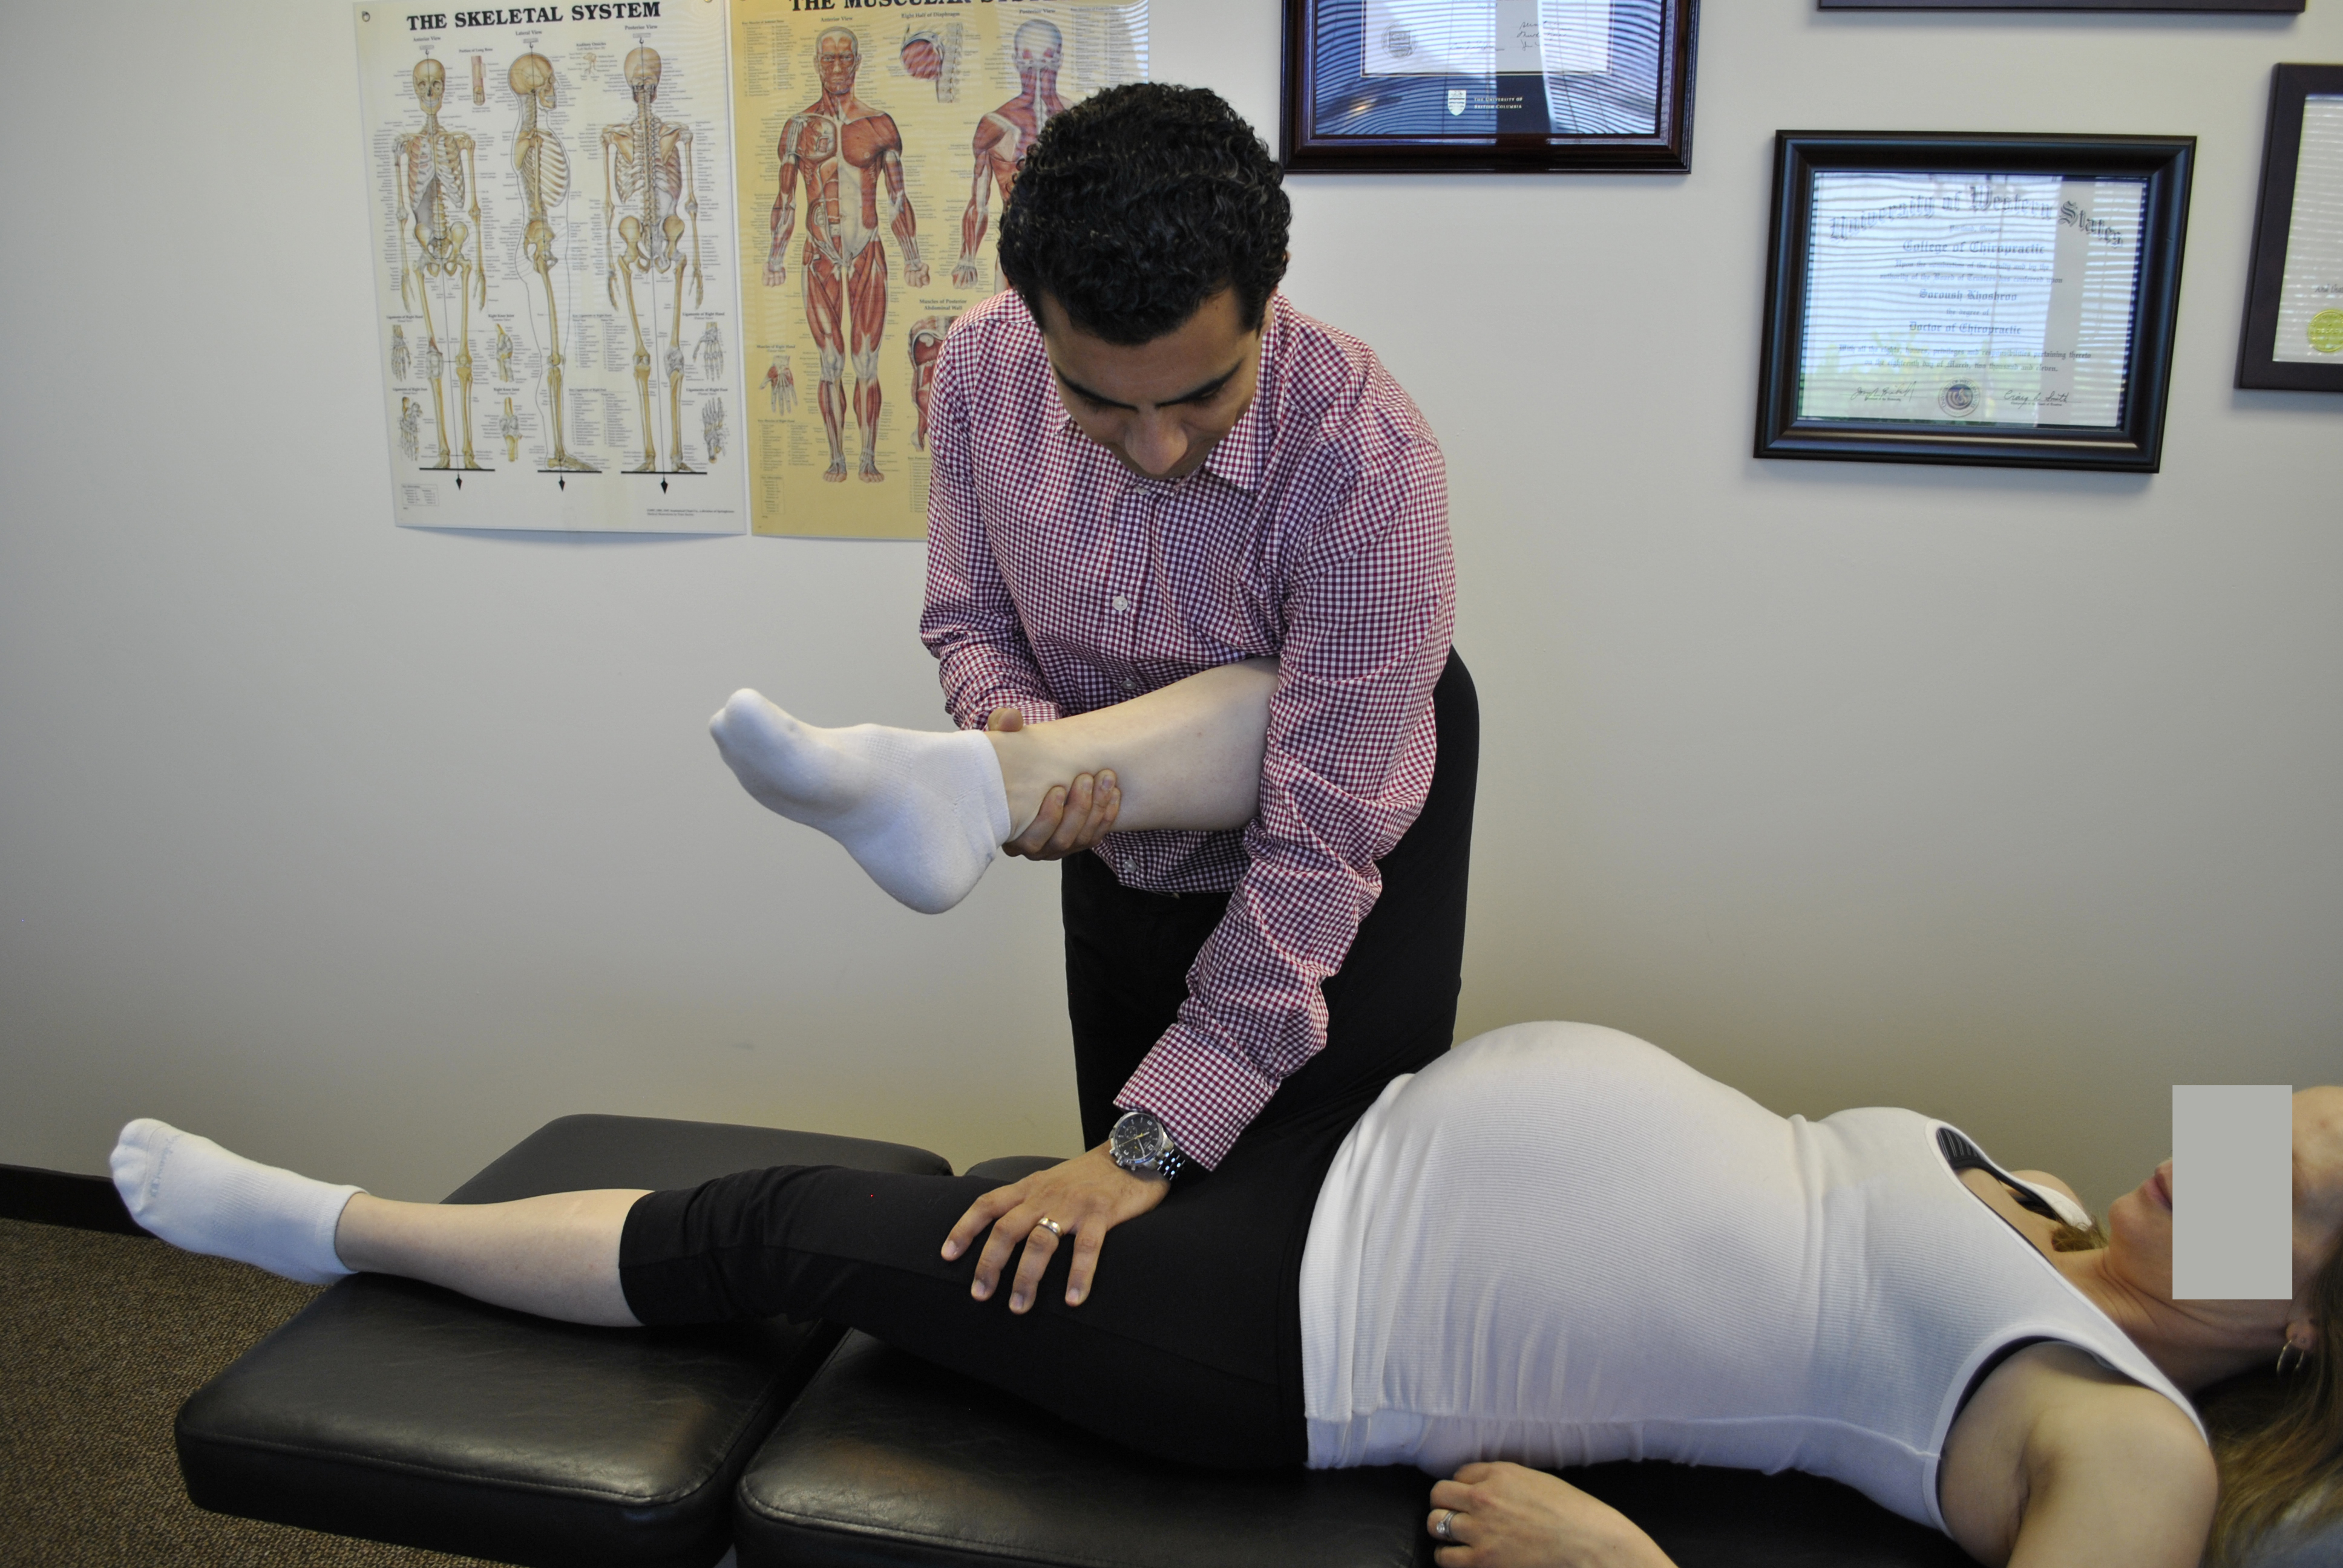 CHIROPRACTIC SPINAL MANIPULATION FOR LOW BACK PAIN OF PREGNANCY: A